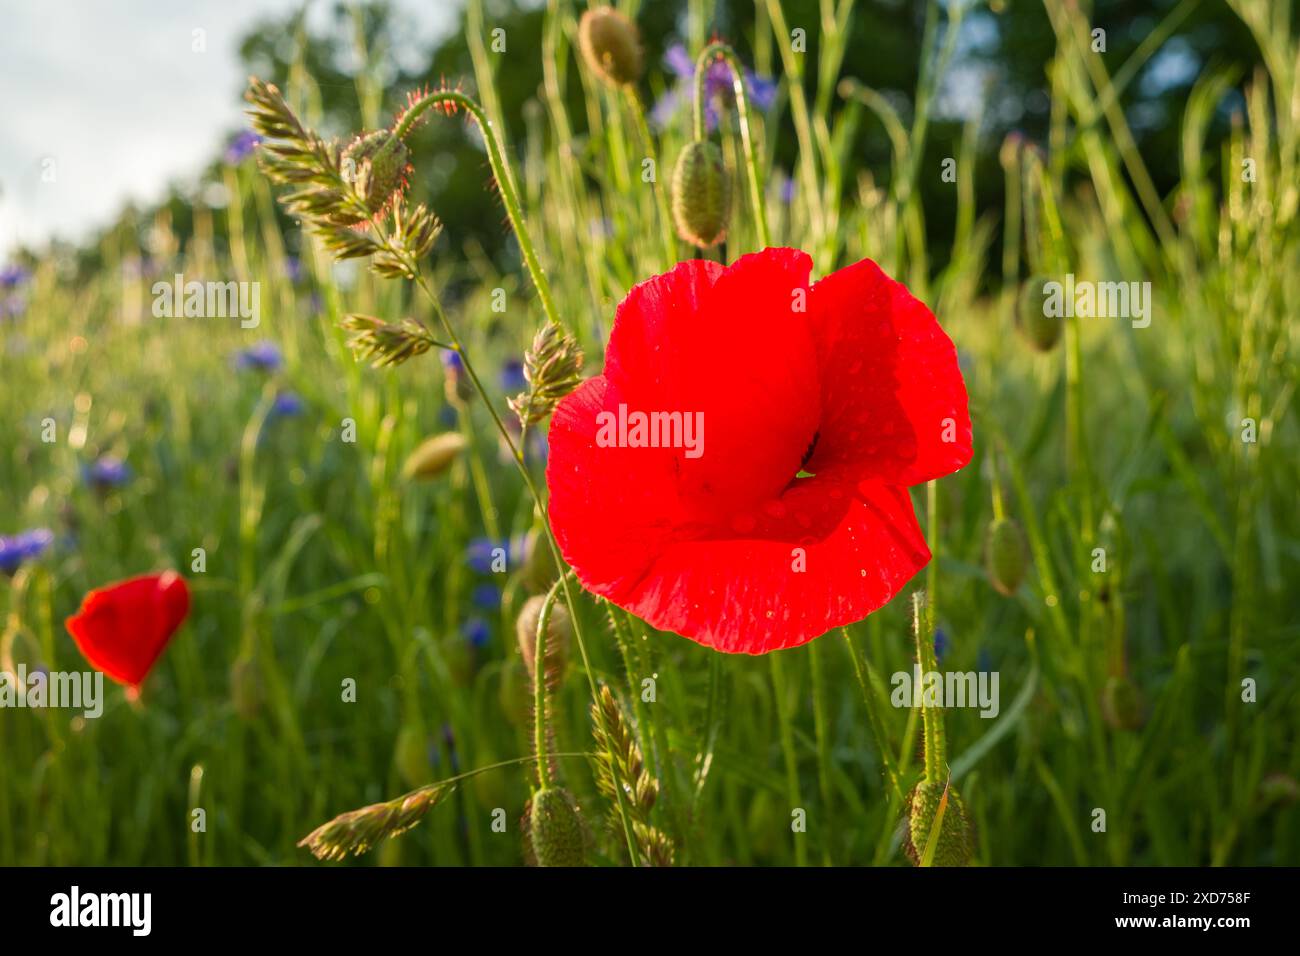 Red poppy single flower with seed capsules at the border of a field with blurred blue cornflowers in the background Stock Photo